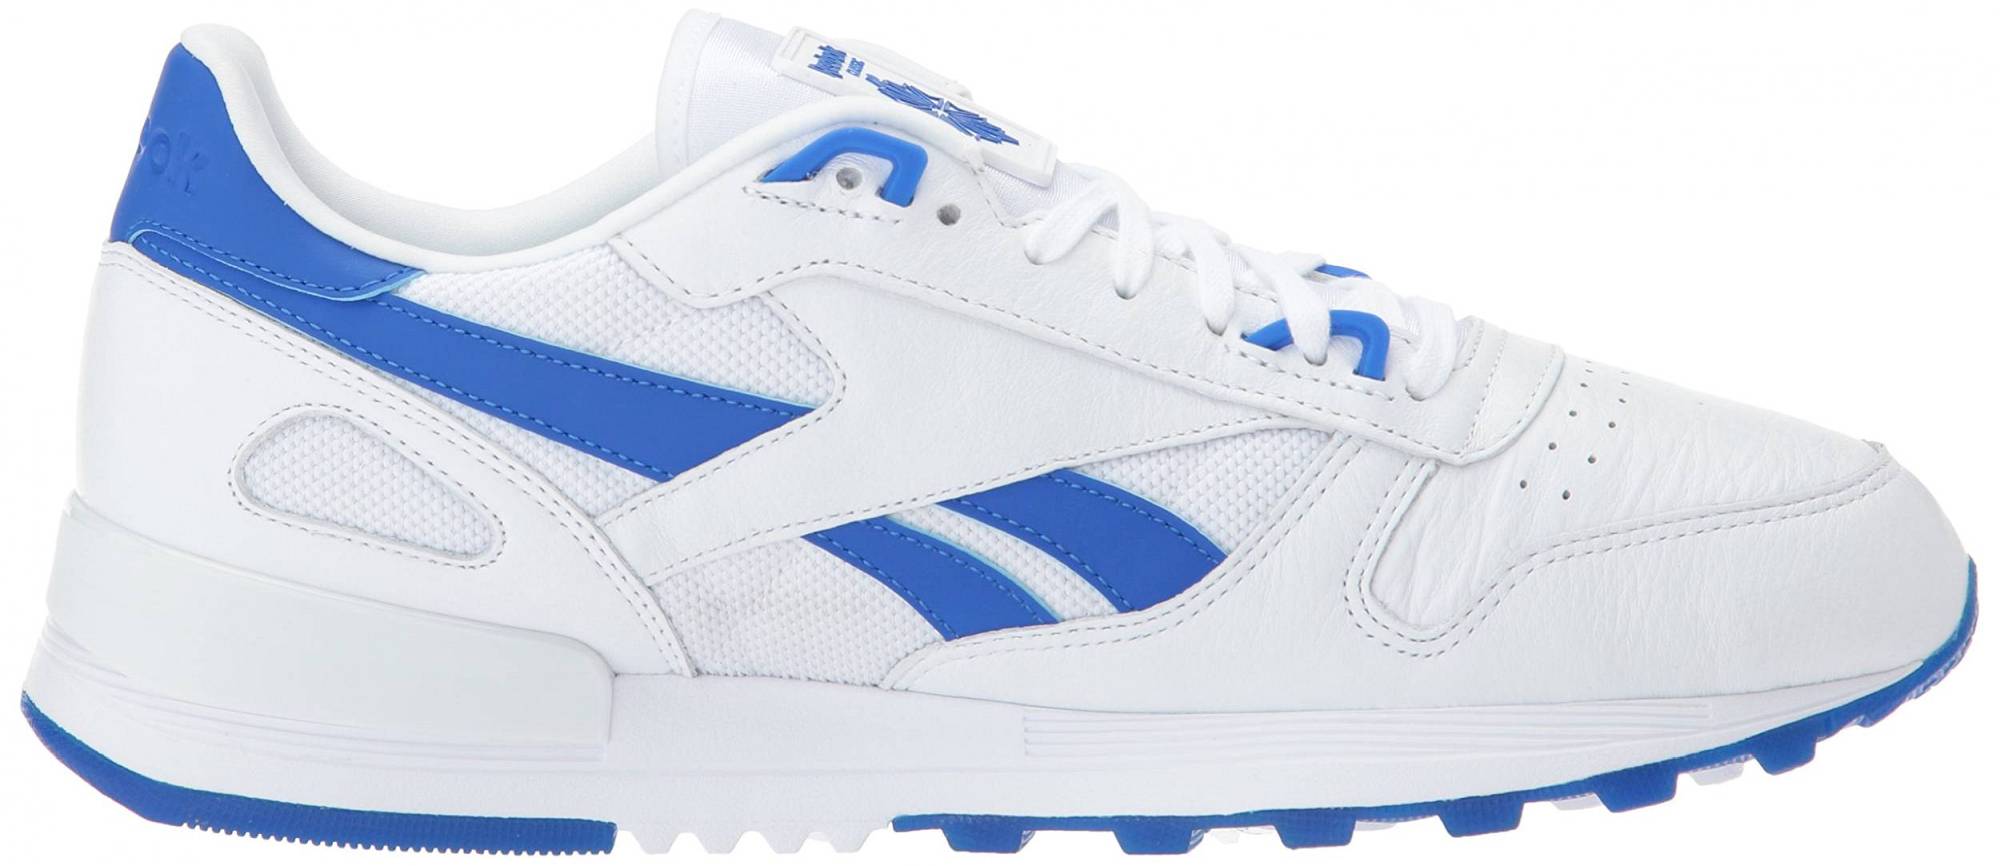 Reebok Classic Leather 2.0 – Shoes Reviews & Reasons To Buy